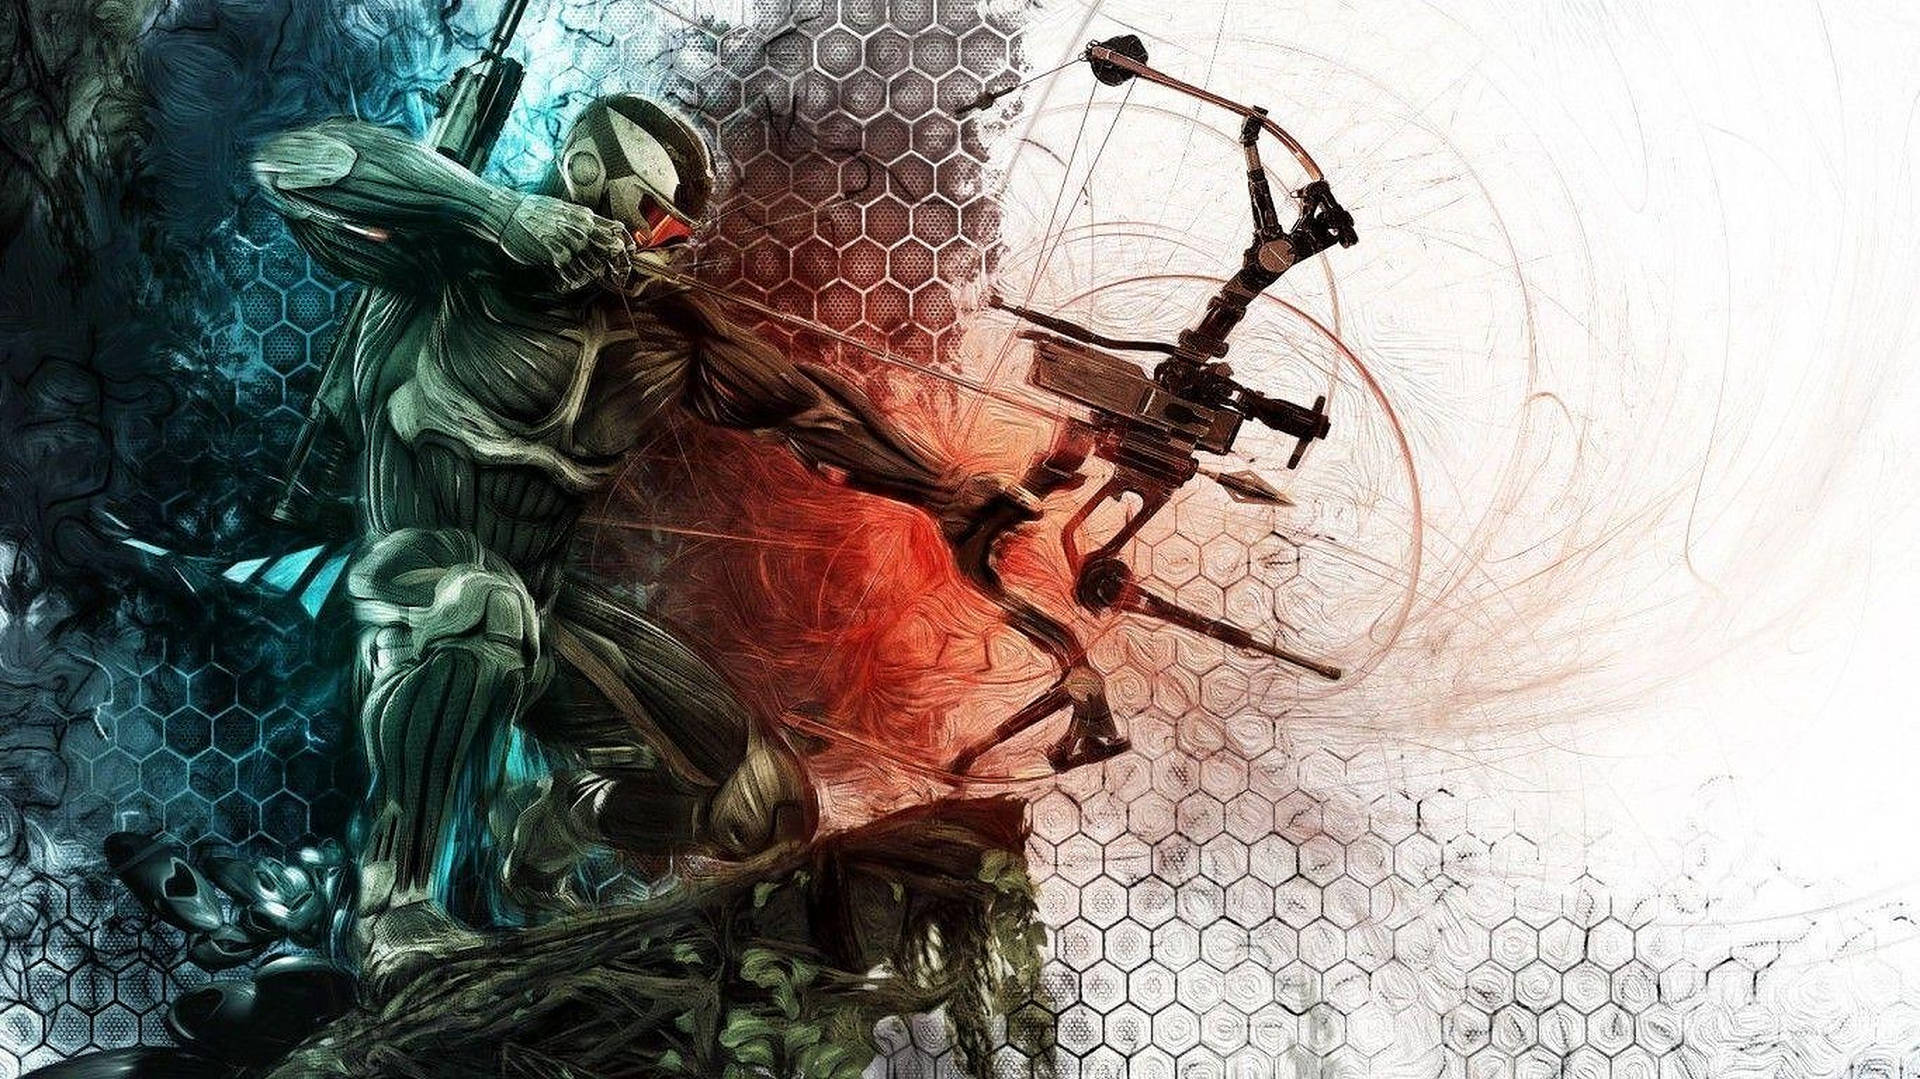 Archery Crysis 3 Poster Wallpaper